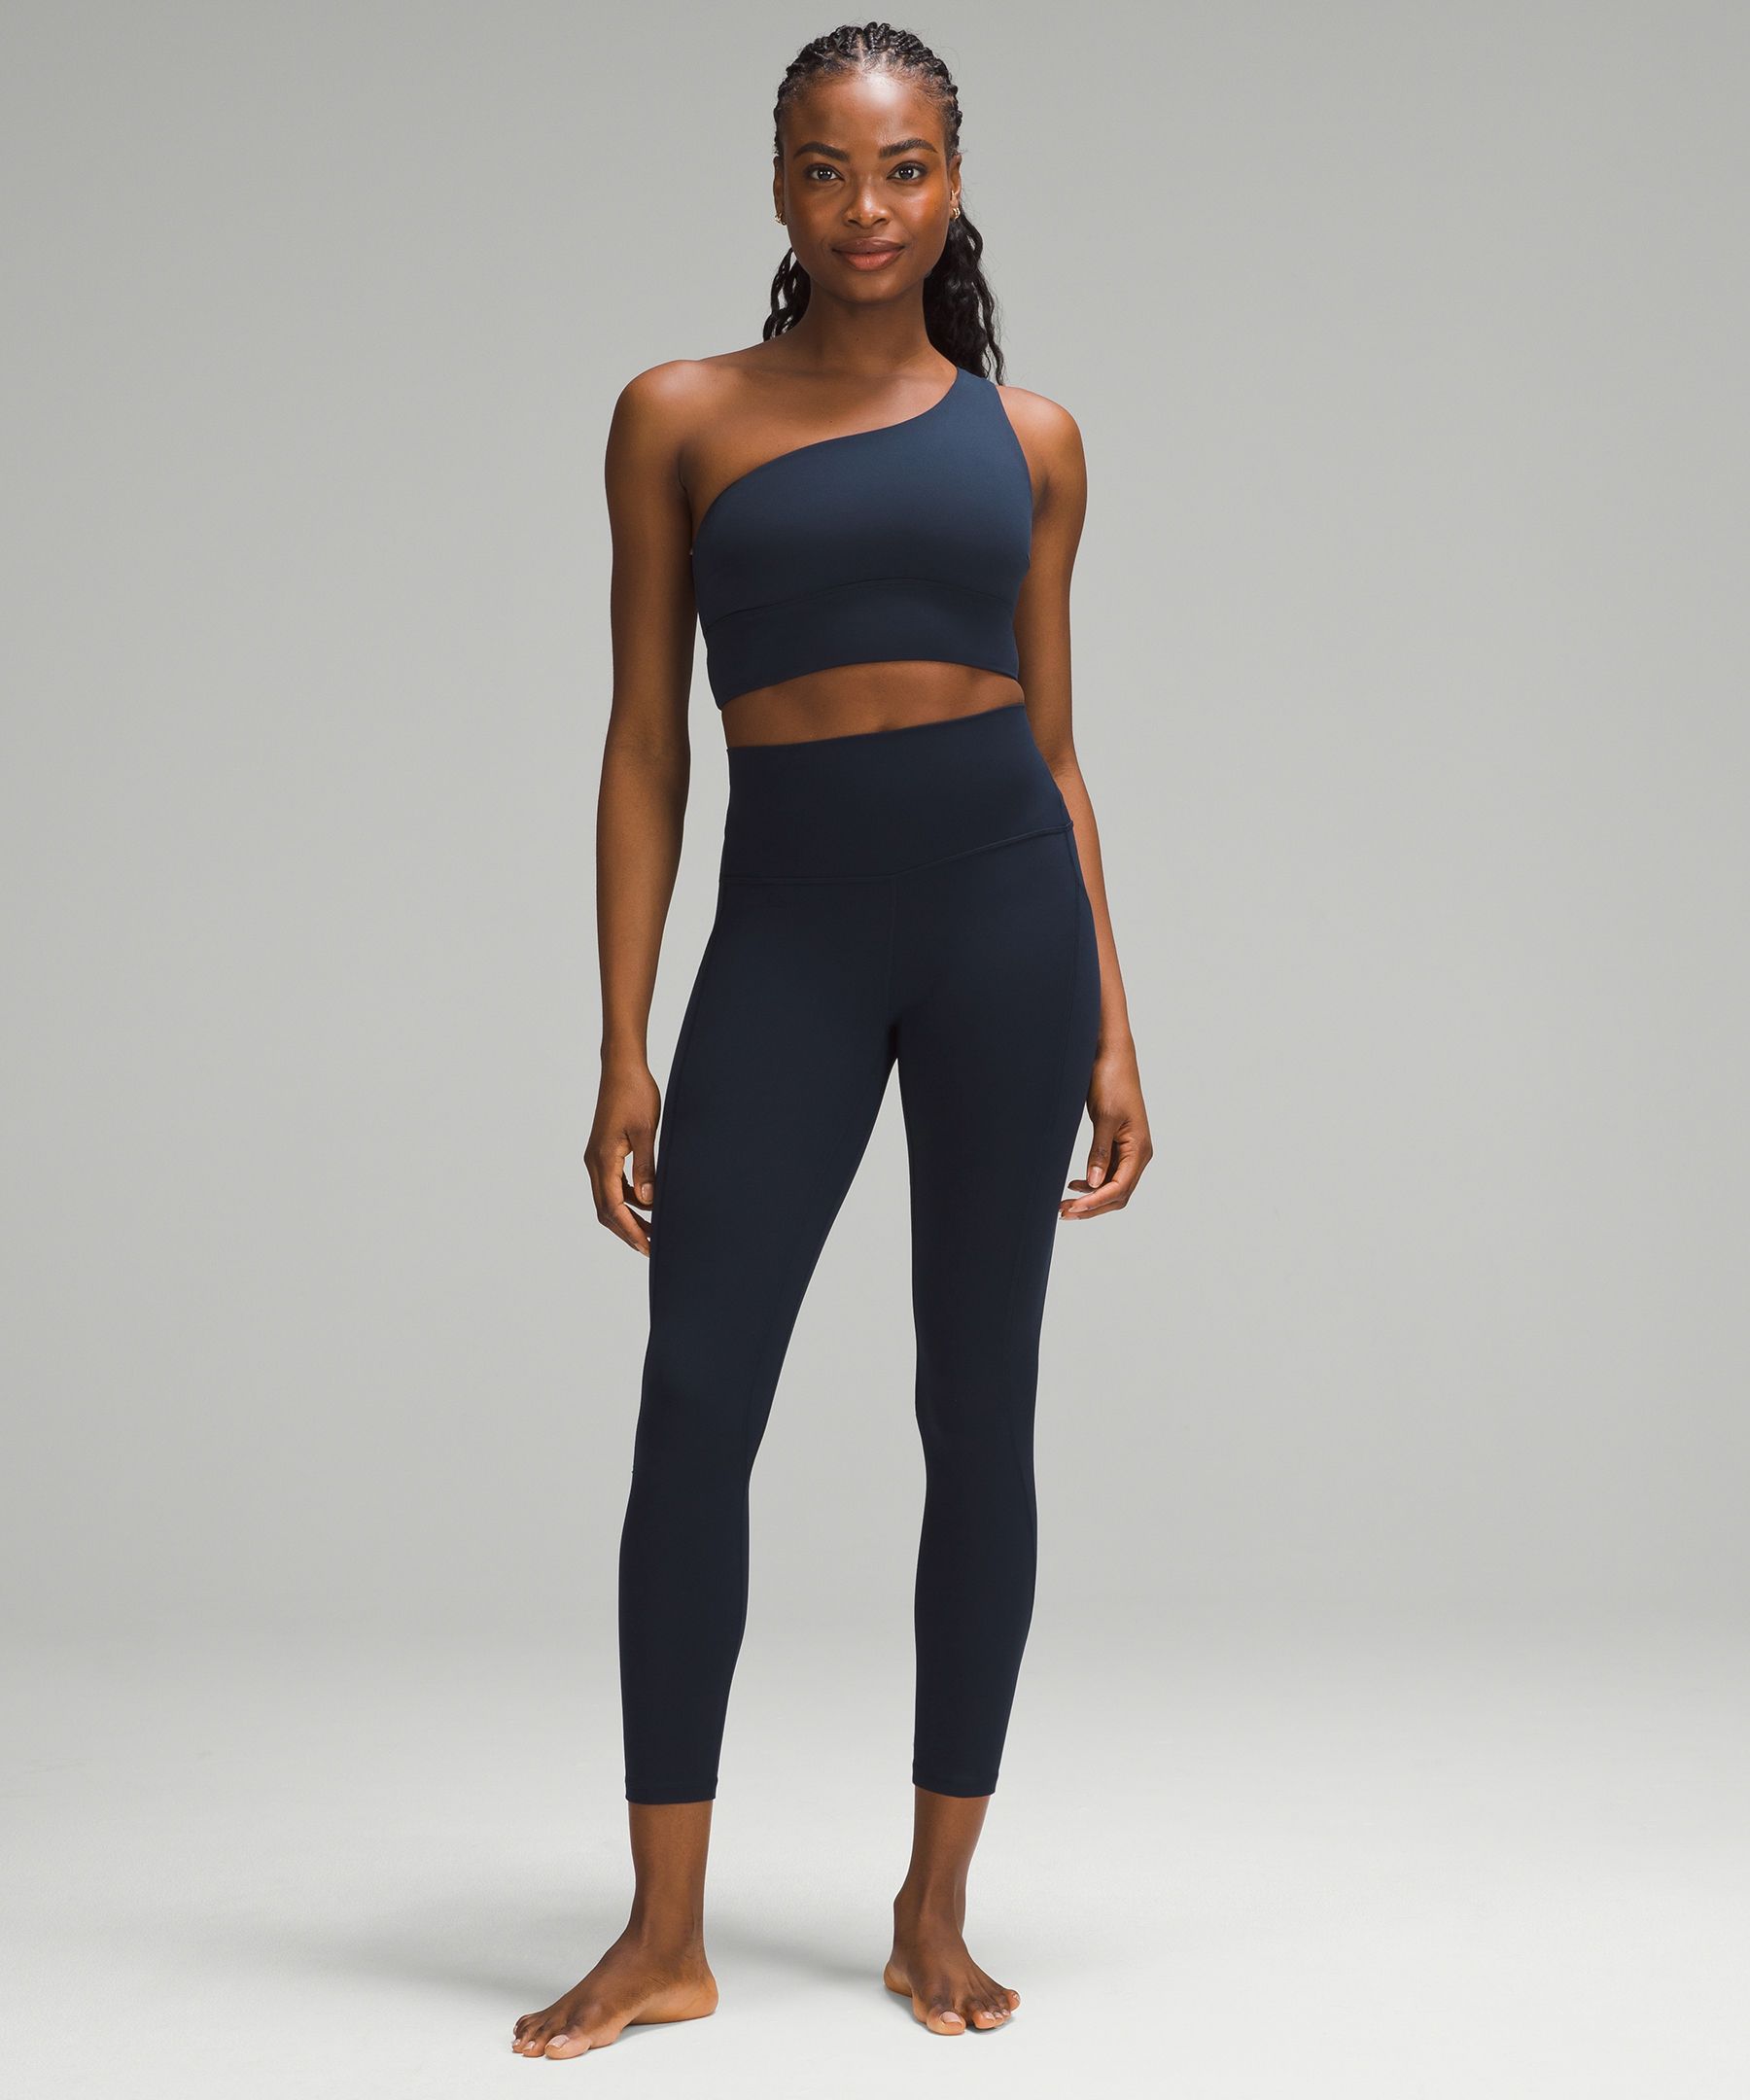 lululemon - This asymmetrical bra with a high neckline will have